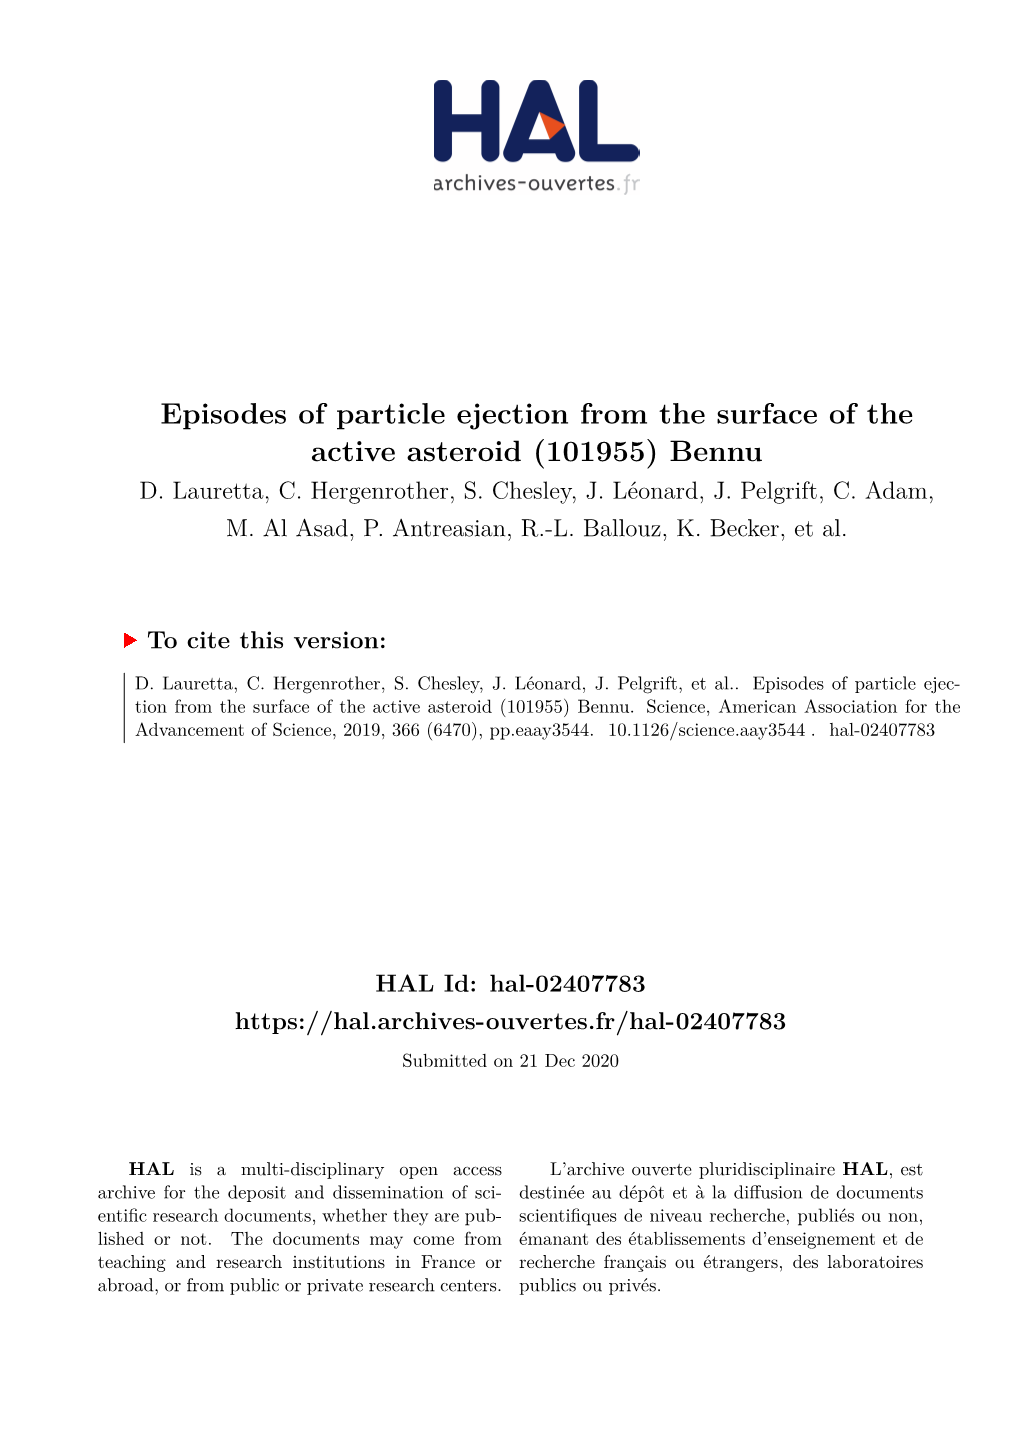 Episodes of Particle Ejection from the Surface of the Active Asteroid (101955) Bennu D